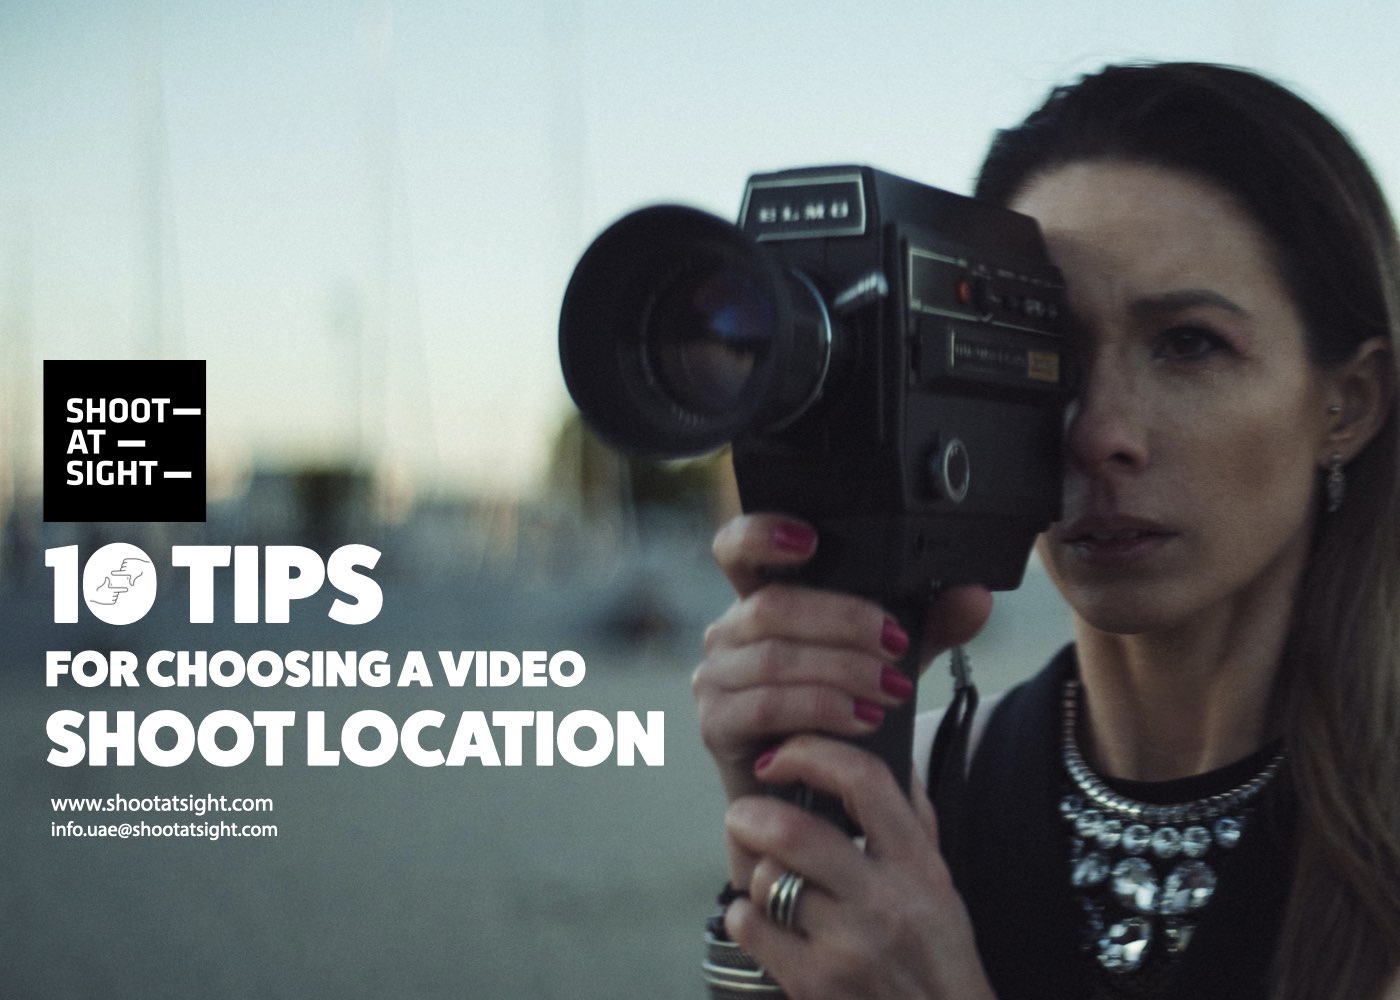 10 Tips for Choosing a Video Shoot Location